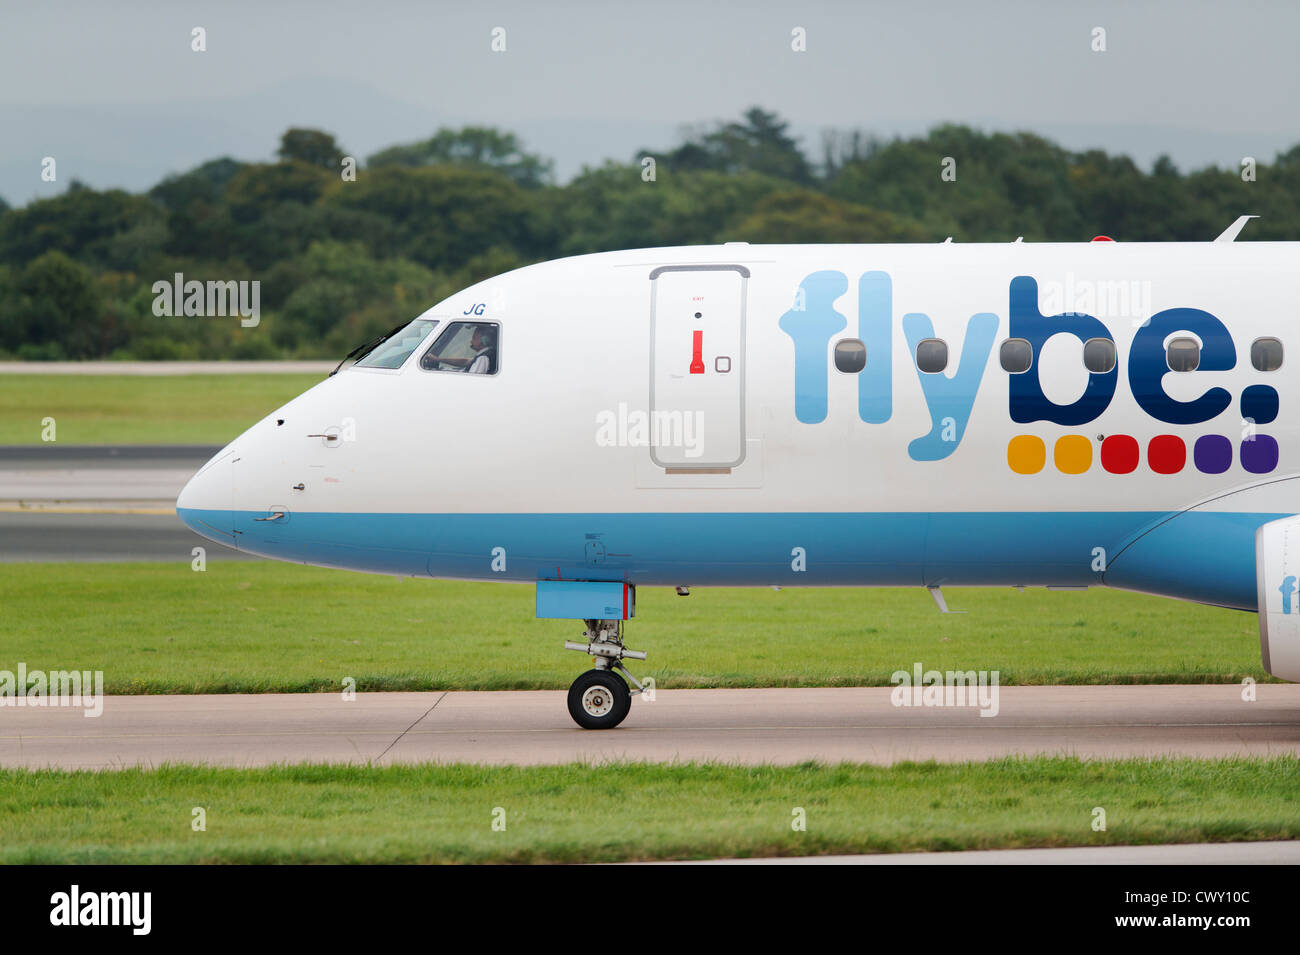 A Flybe Embraer 190 taxiing on the runway of Manchester International Airport (Editorial use only) Stock Photo